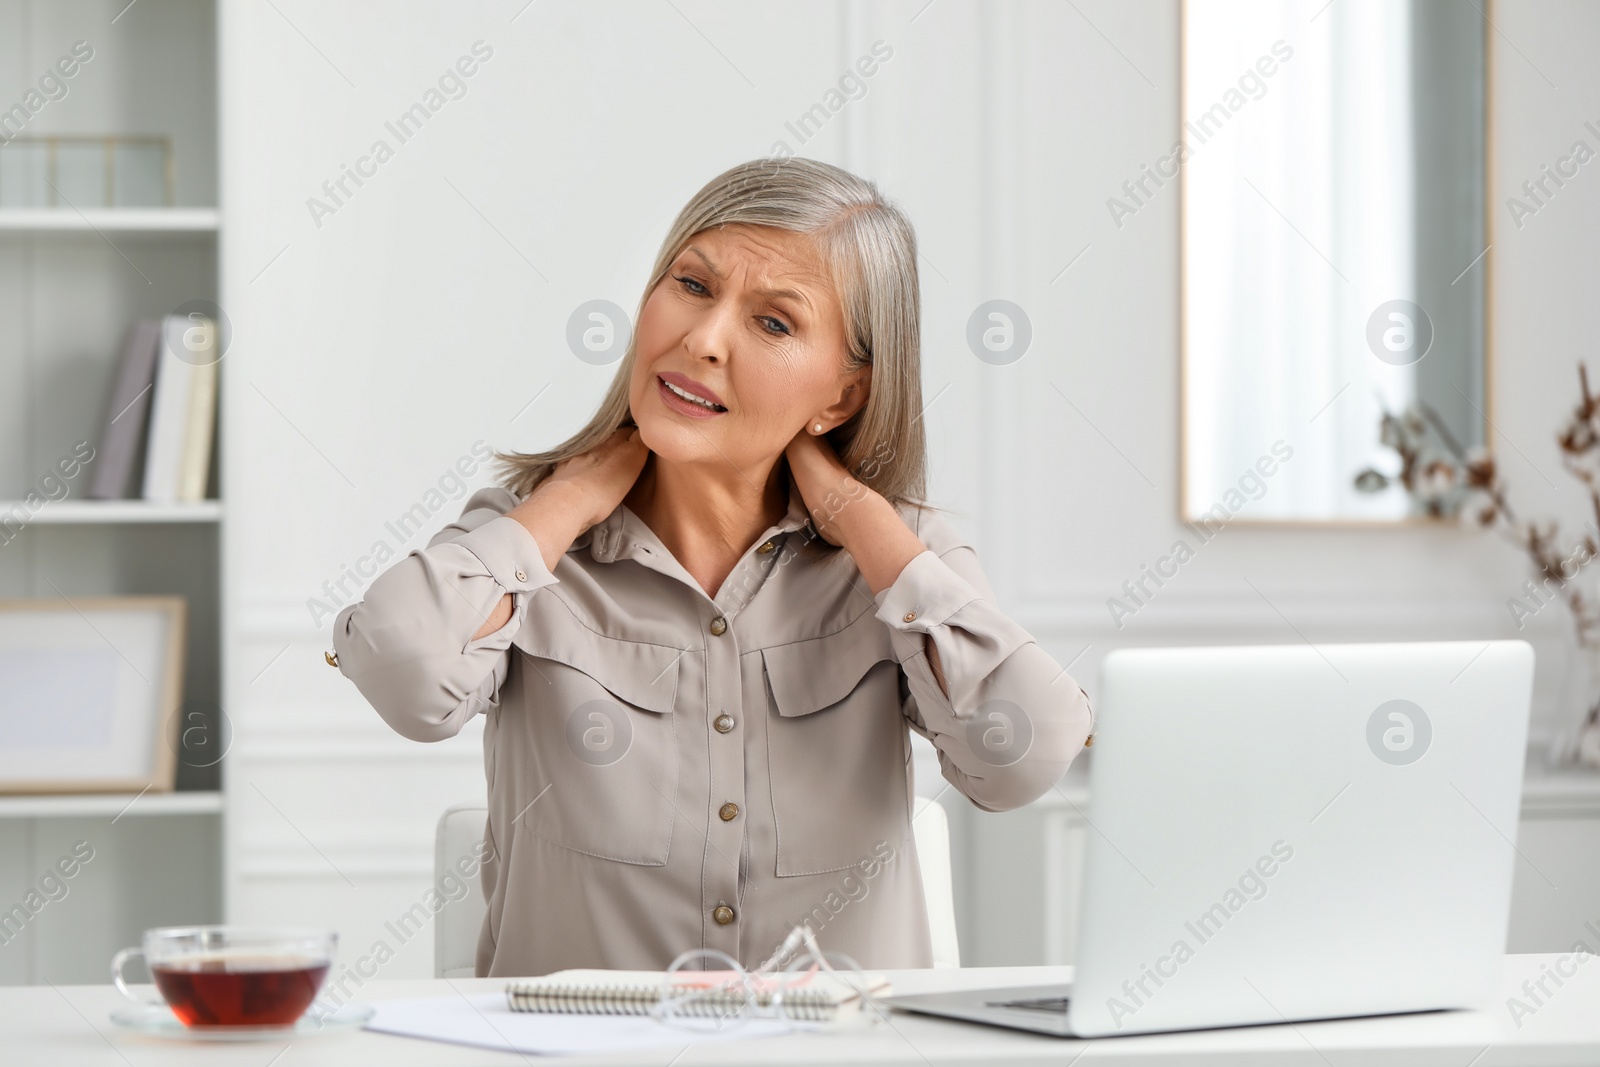 Photo of Woman suffering from neck pain at workplace in room